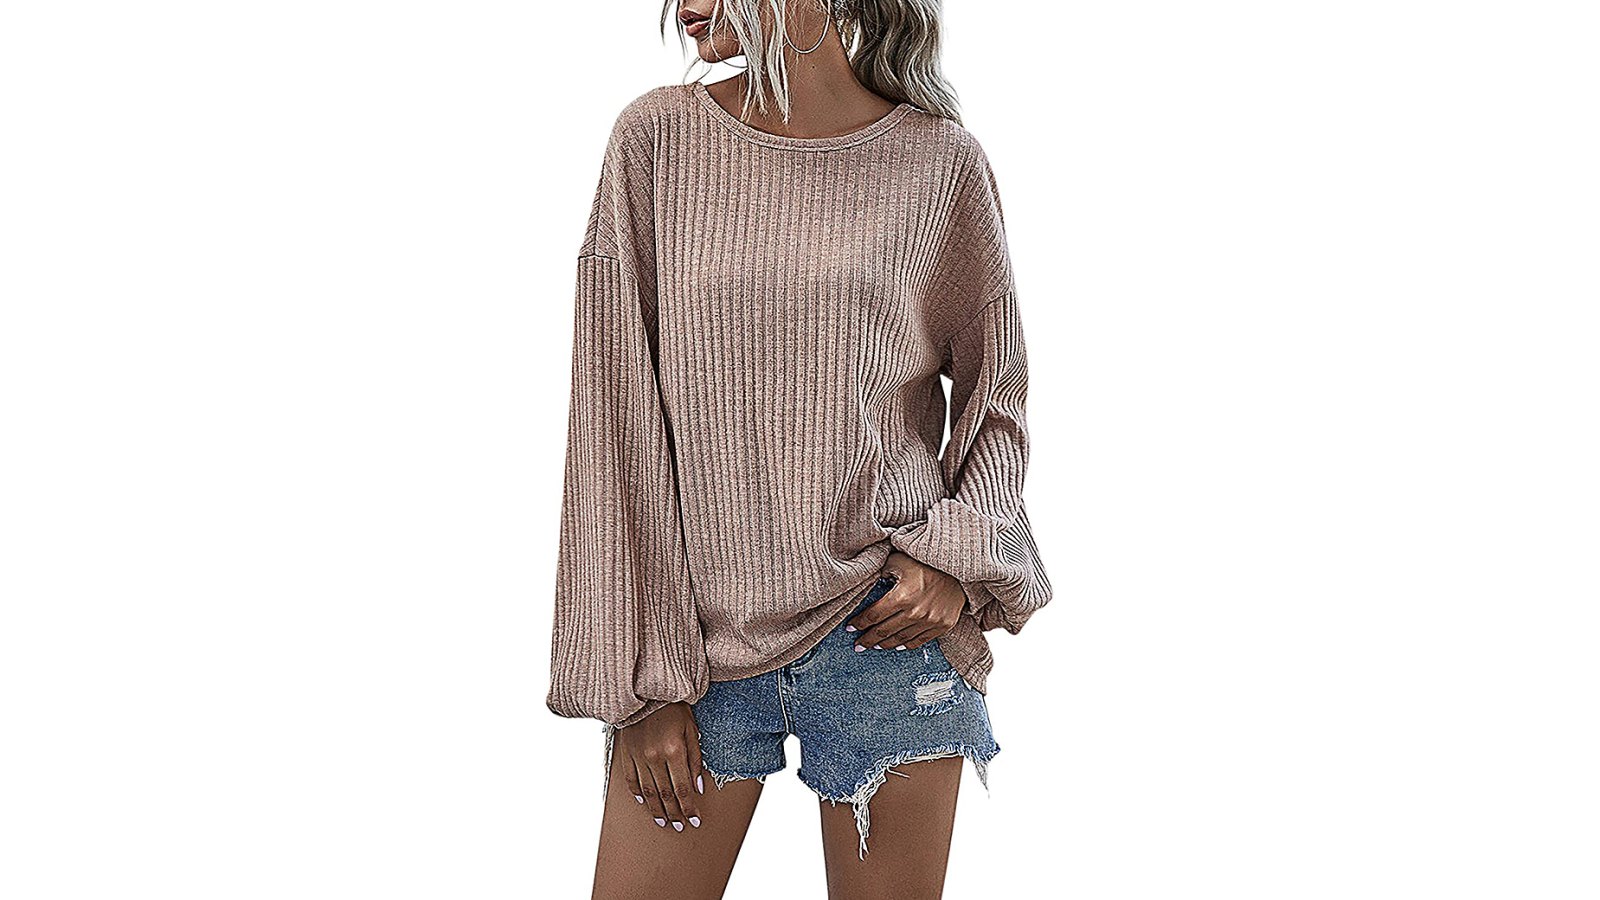 Hibluco Casual Loose Knitted Long-Sleeve Crew Neck Sweater